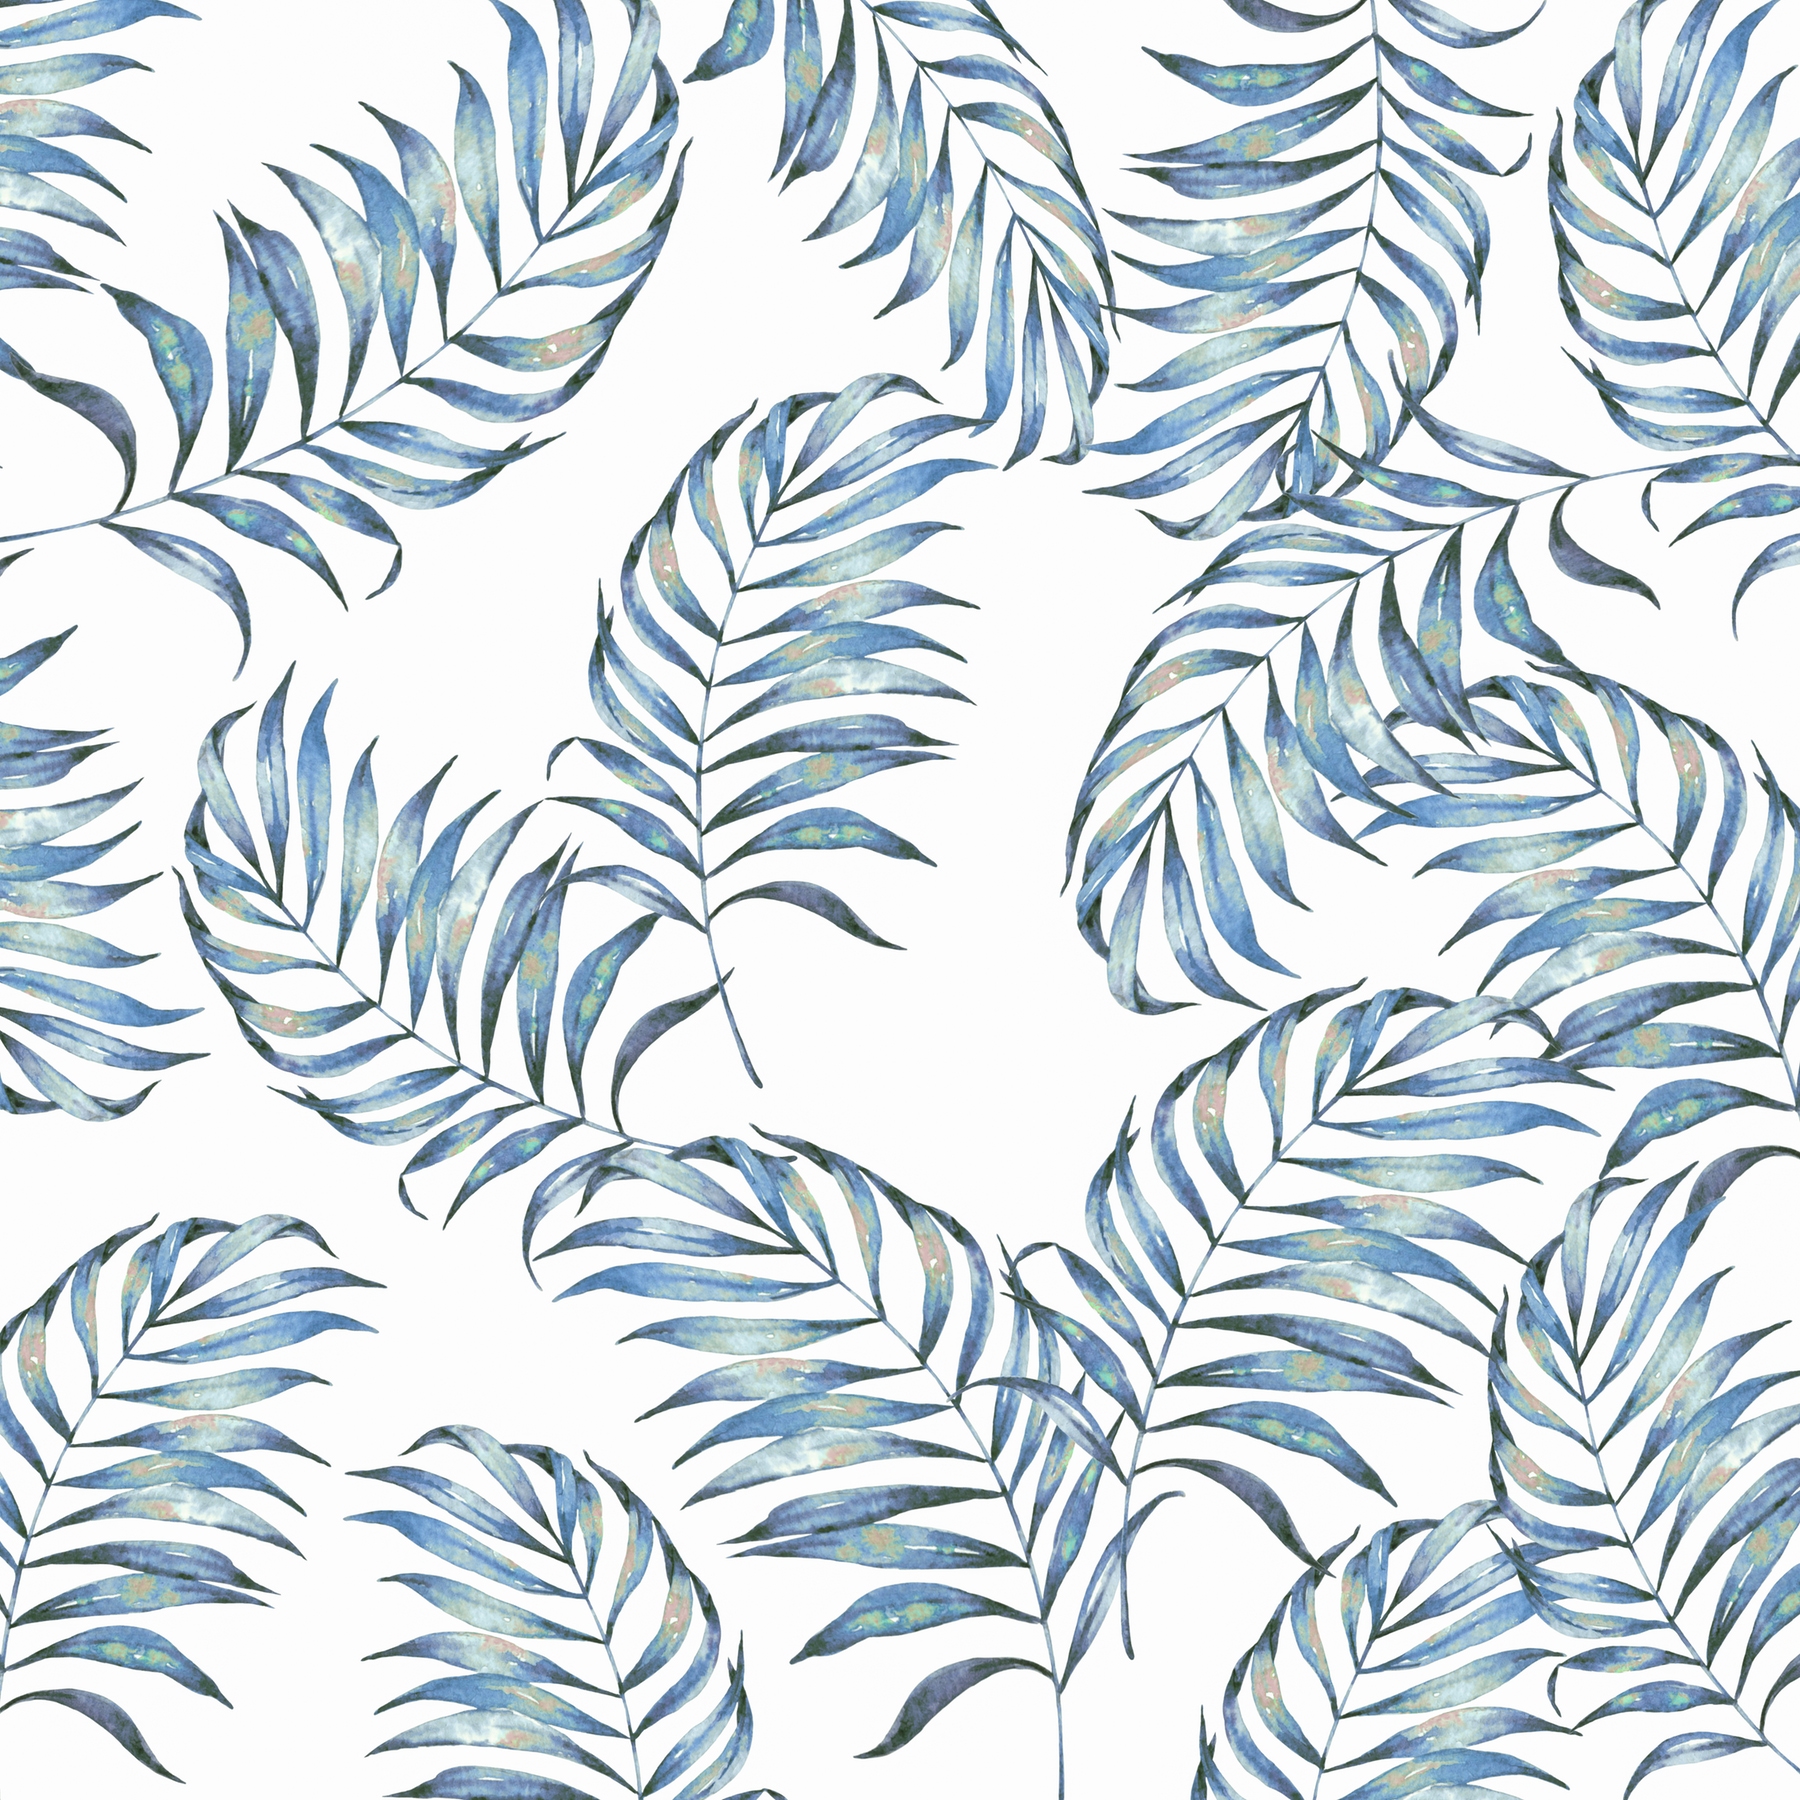 Buy Blue Leaves wallpaper - Free shipping at Happywall.co.uk